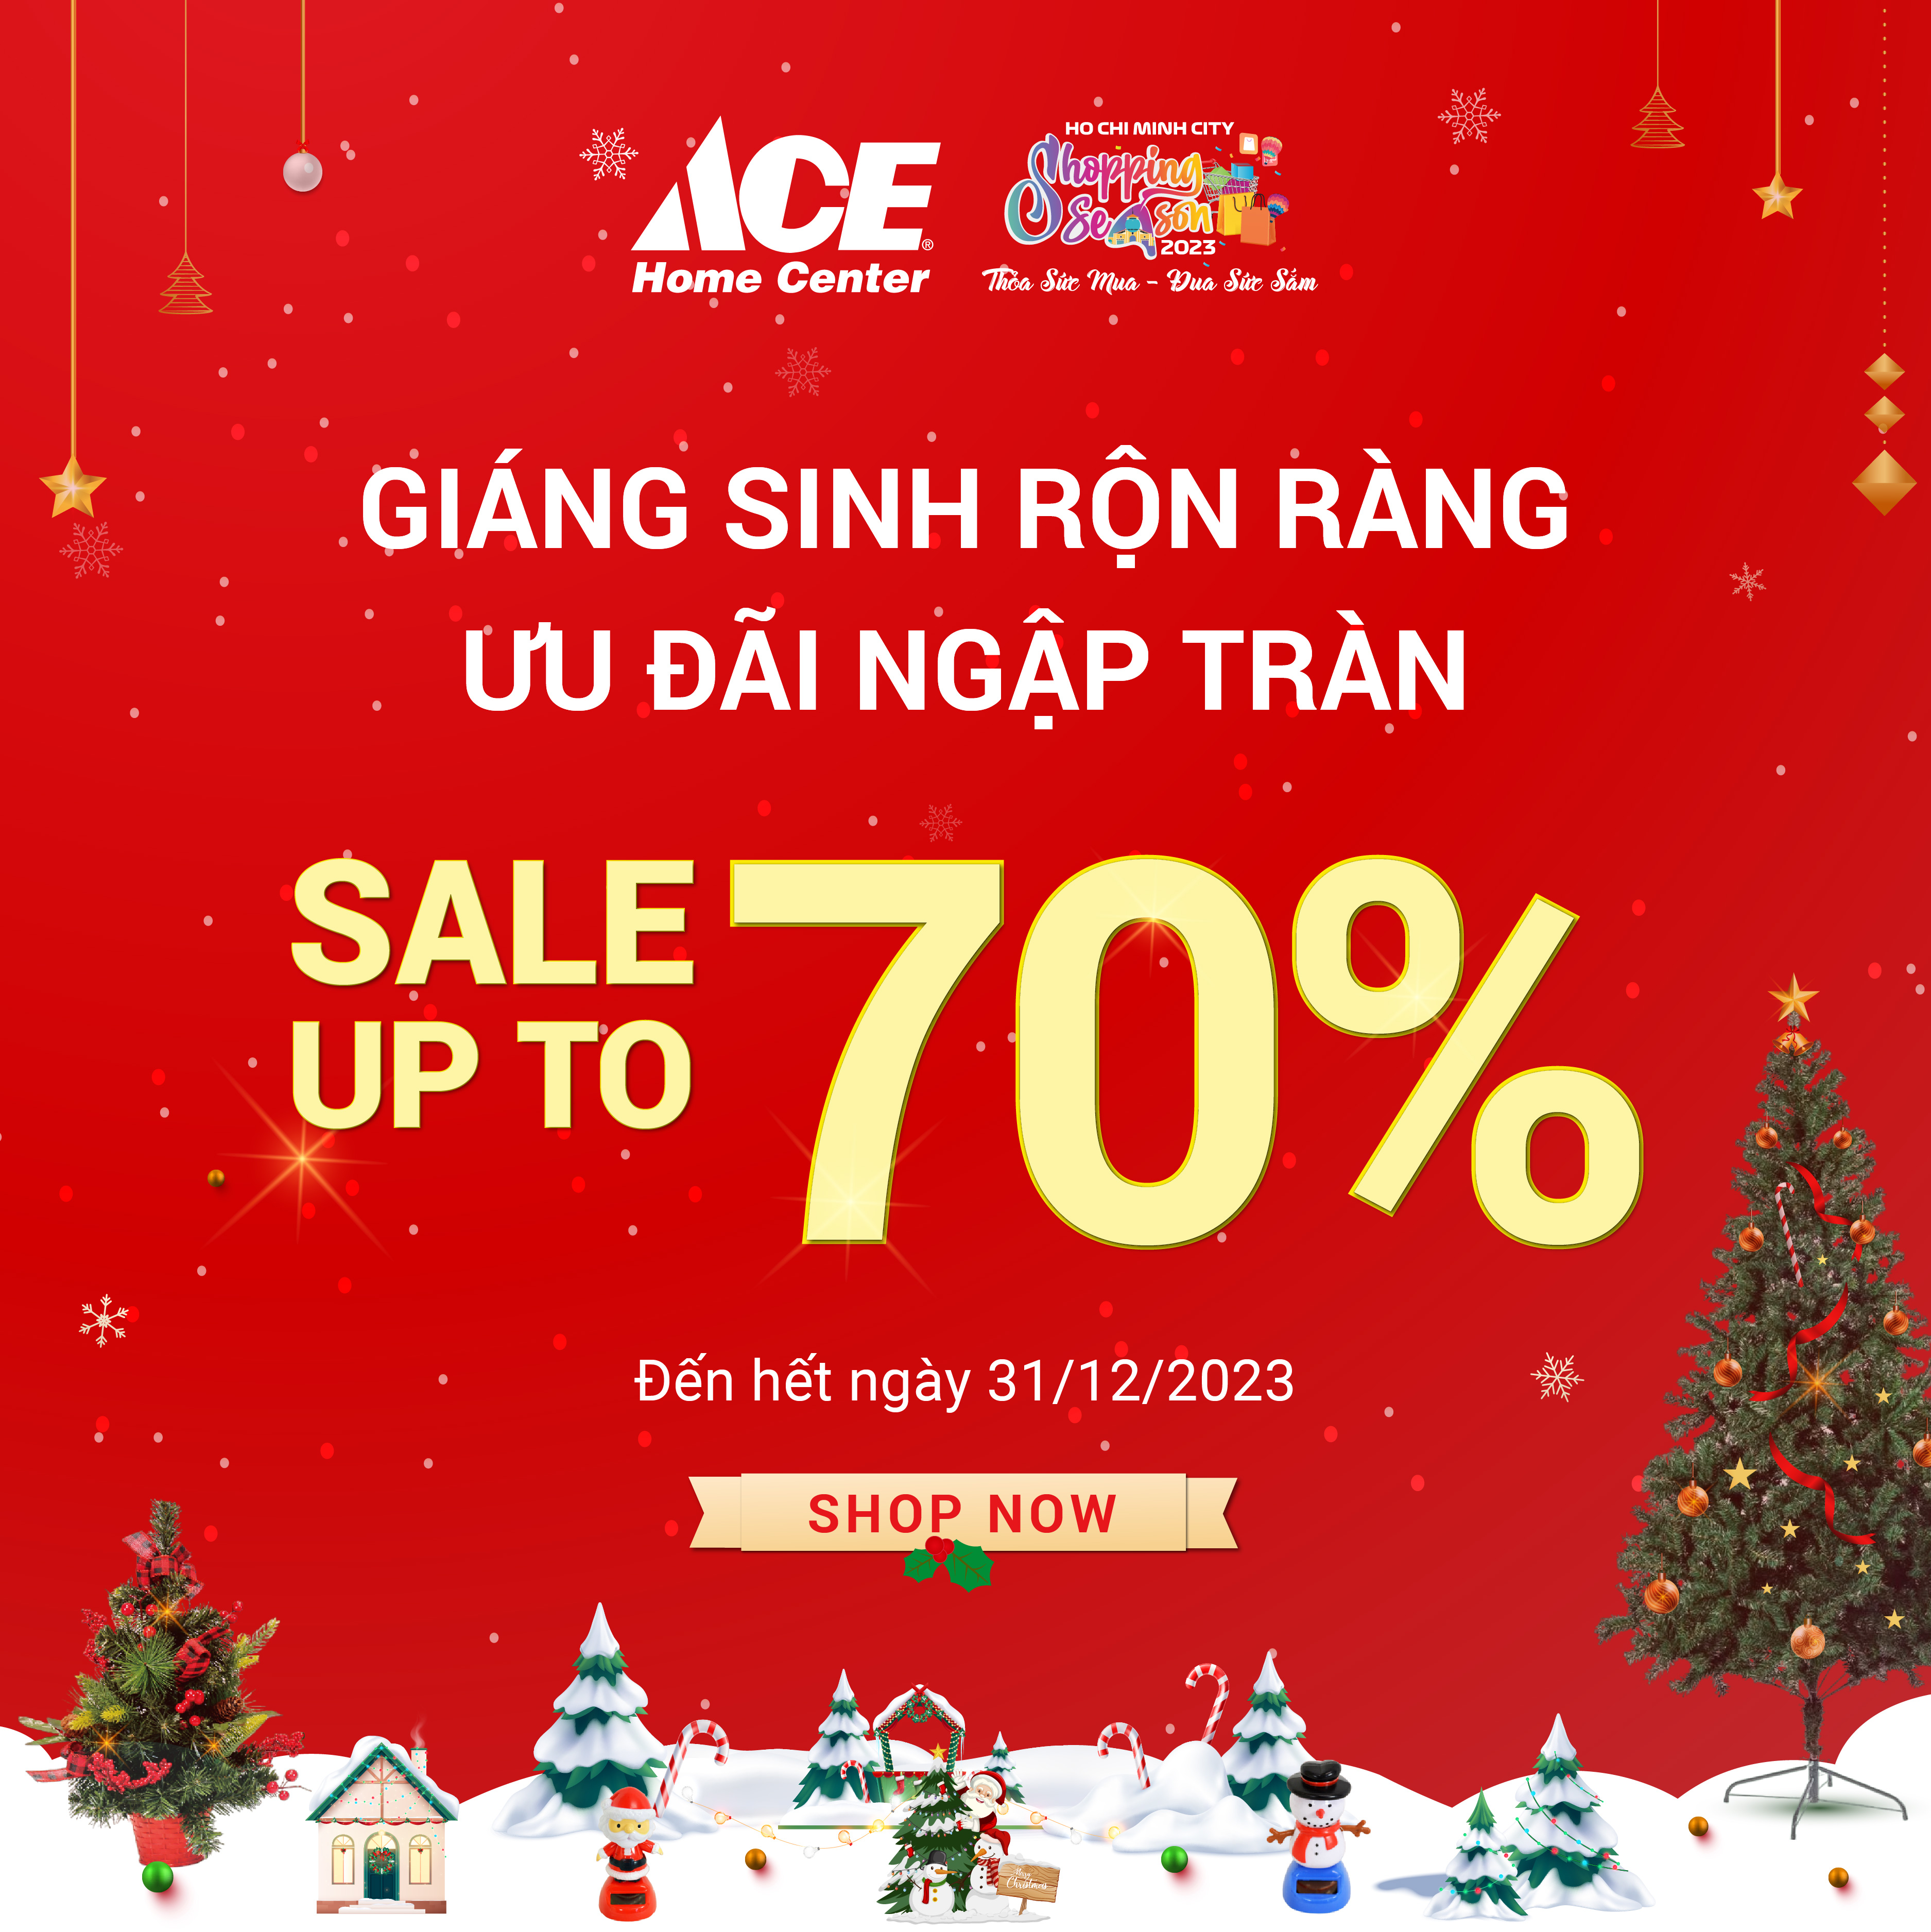 CELEBRATE CHRISTMAS WITH ACE